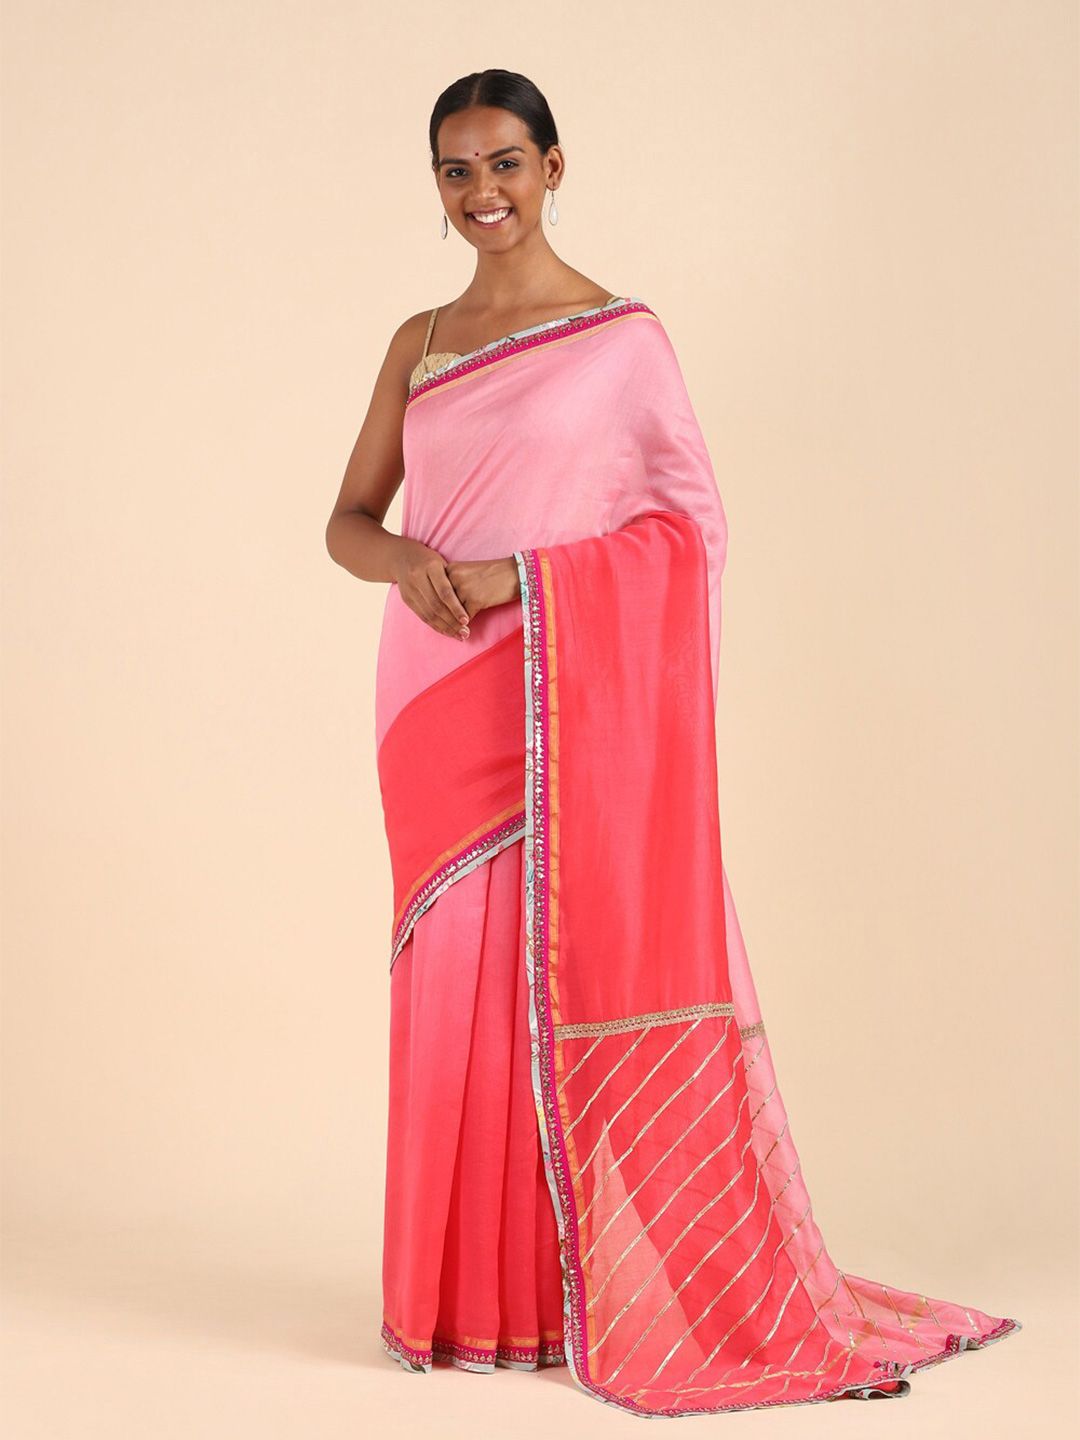 Taneira Light Pink & Silver-Toned Colourblocked Embroidered Silk Cotton Saree Price in India